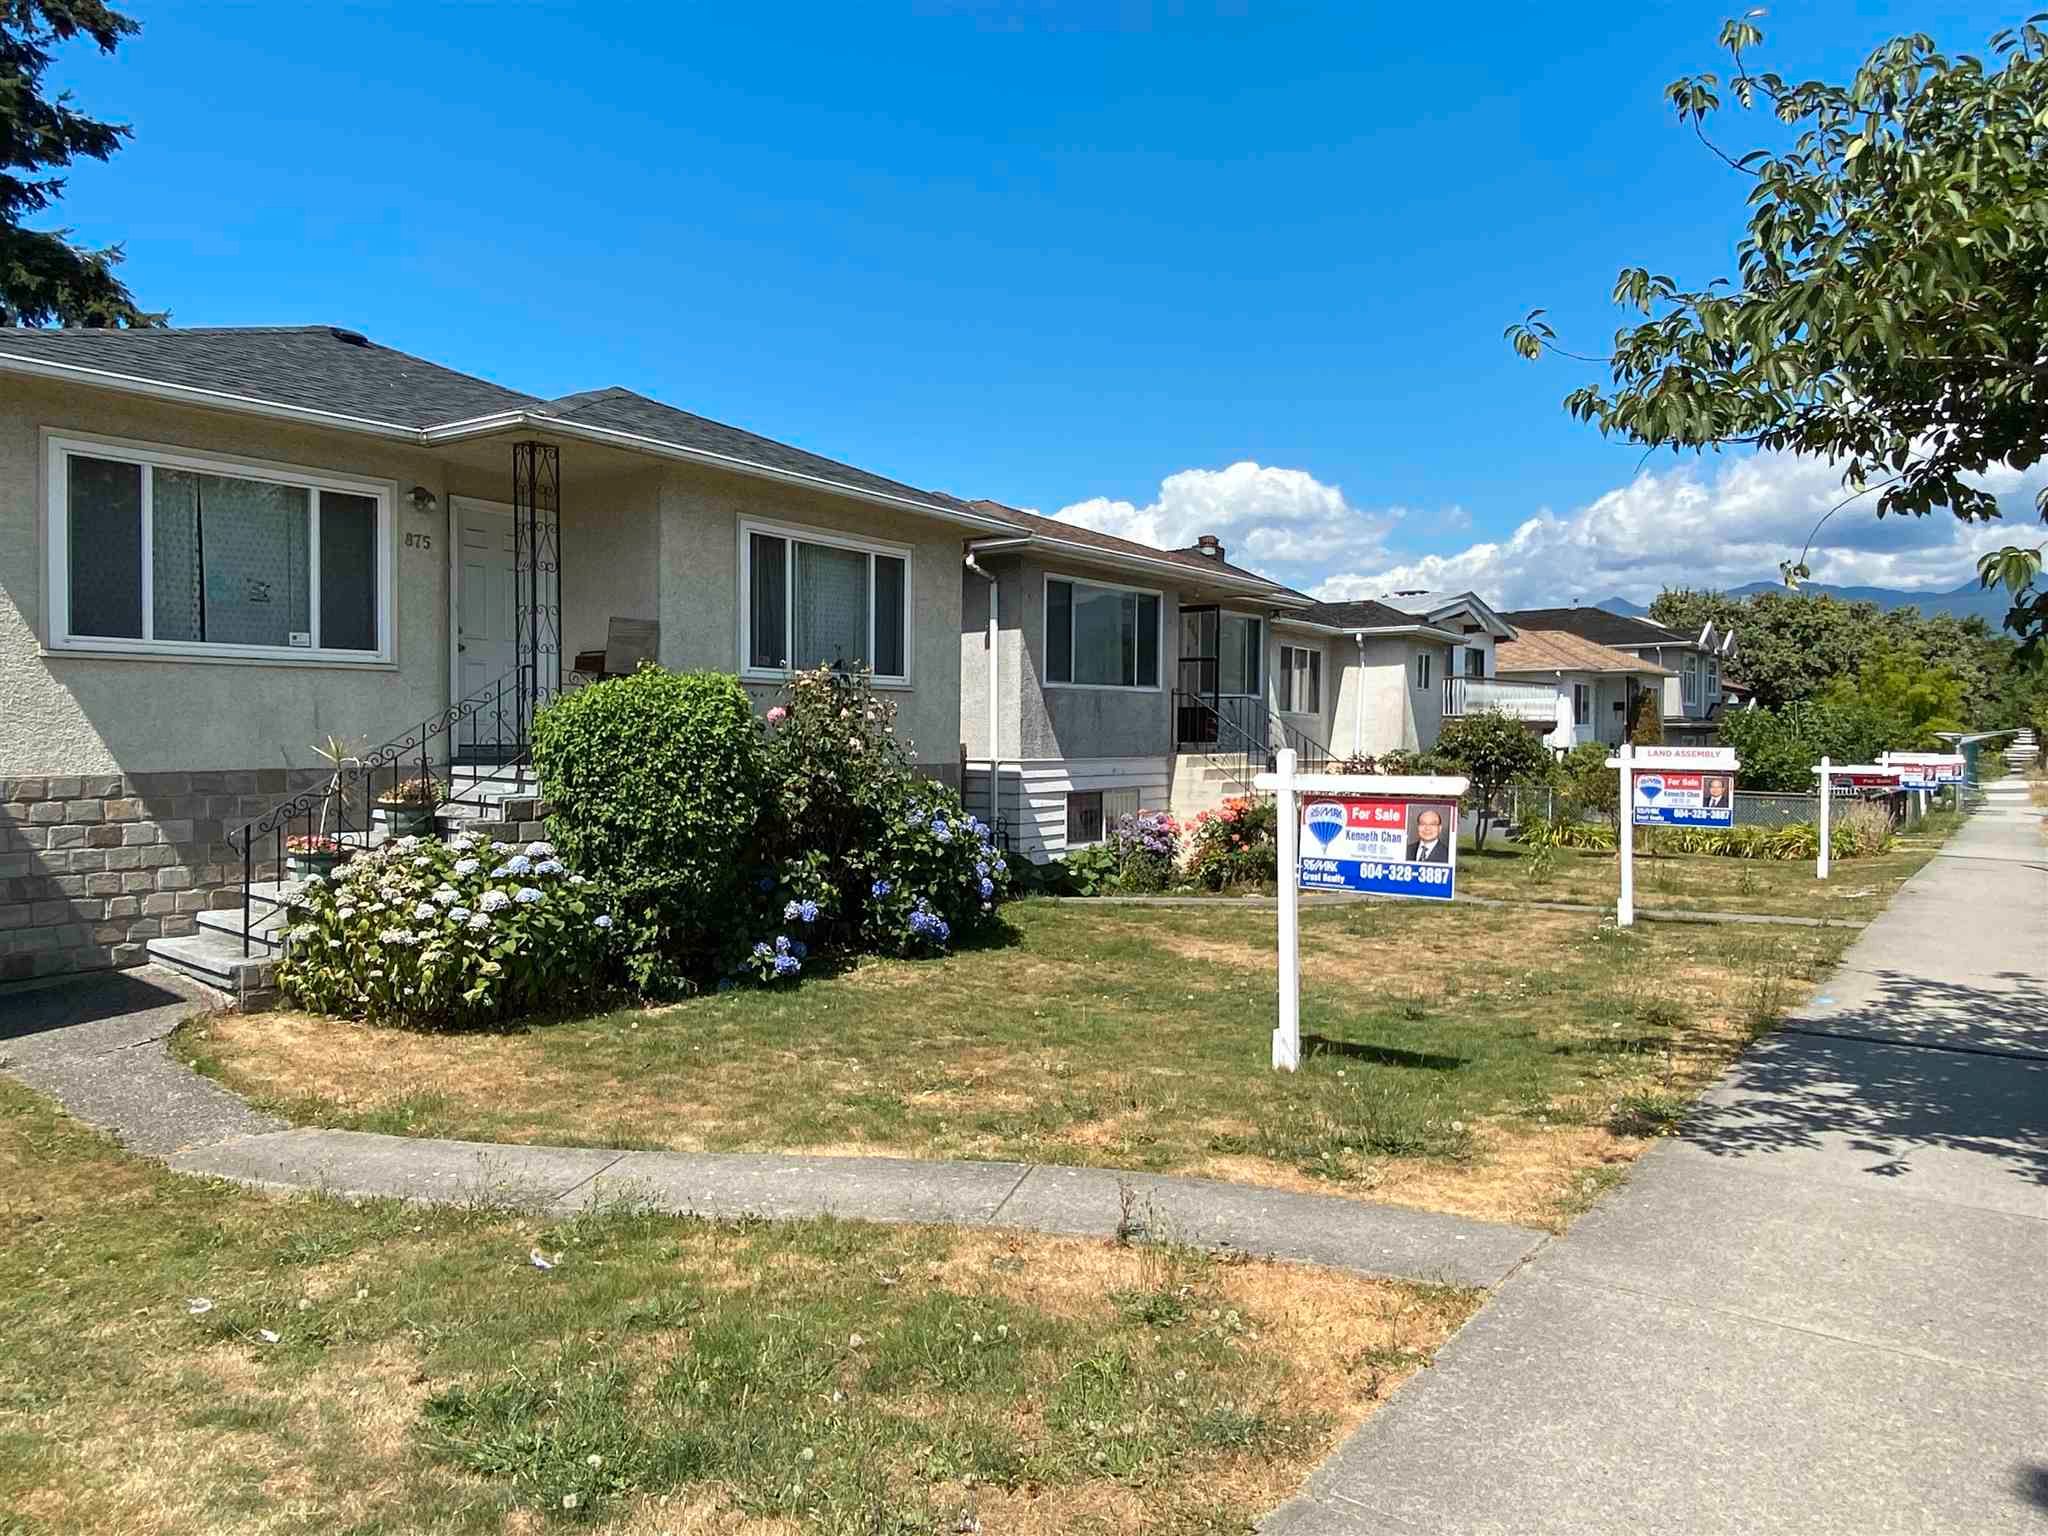 Photo 4: Photos: 865 NANAIMO Street in Vancouver: Hastings House for sale (Vancouver East)  : MLS®# R2567936